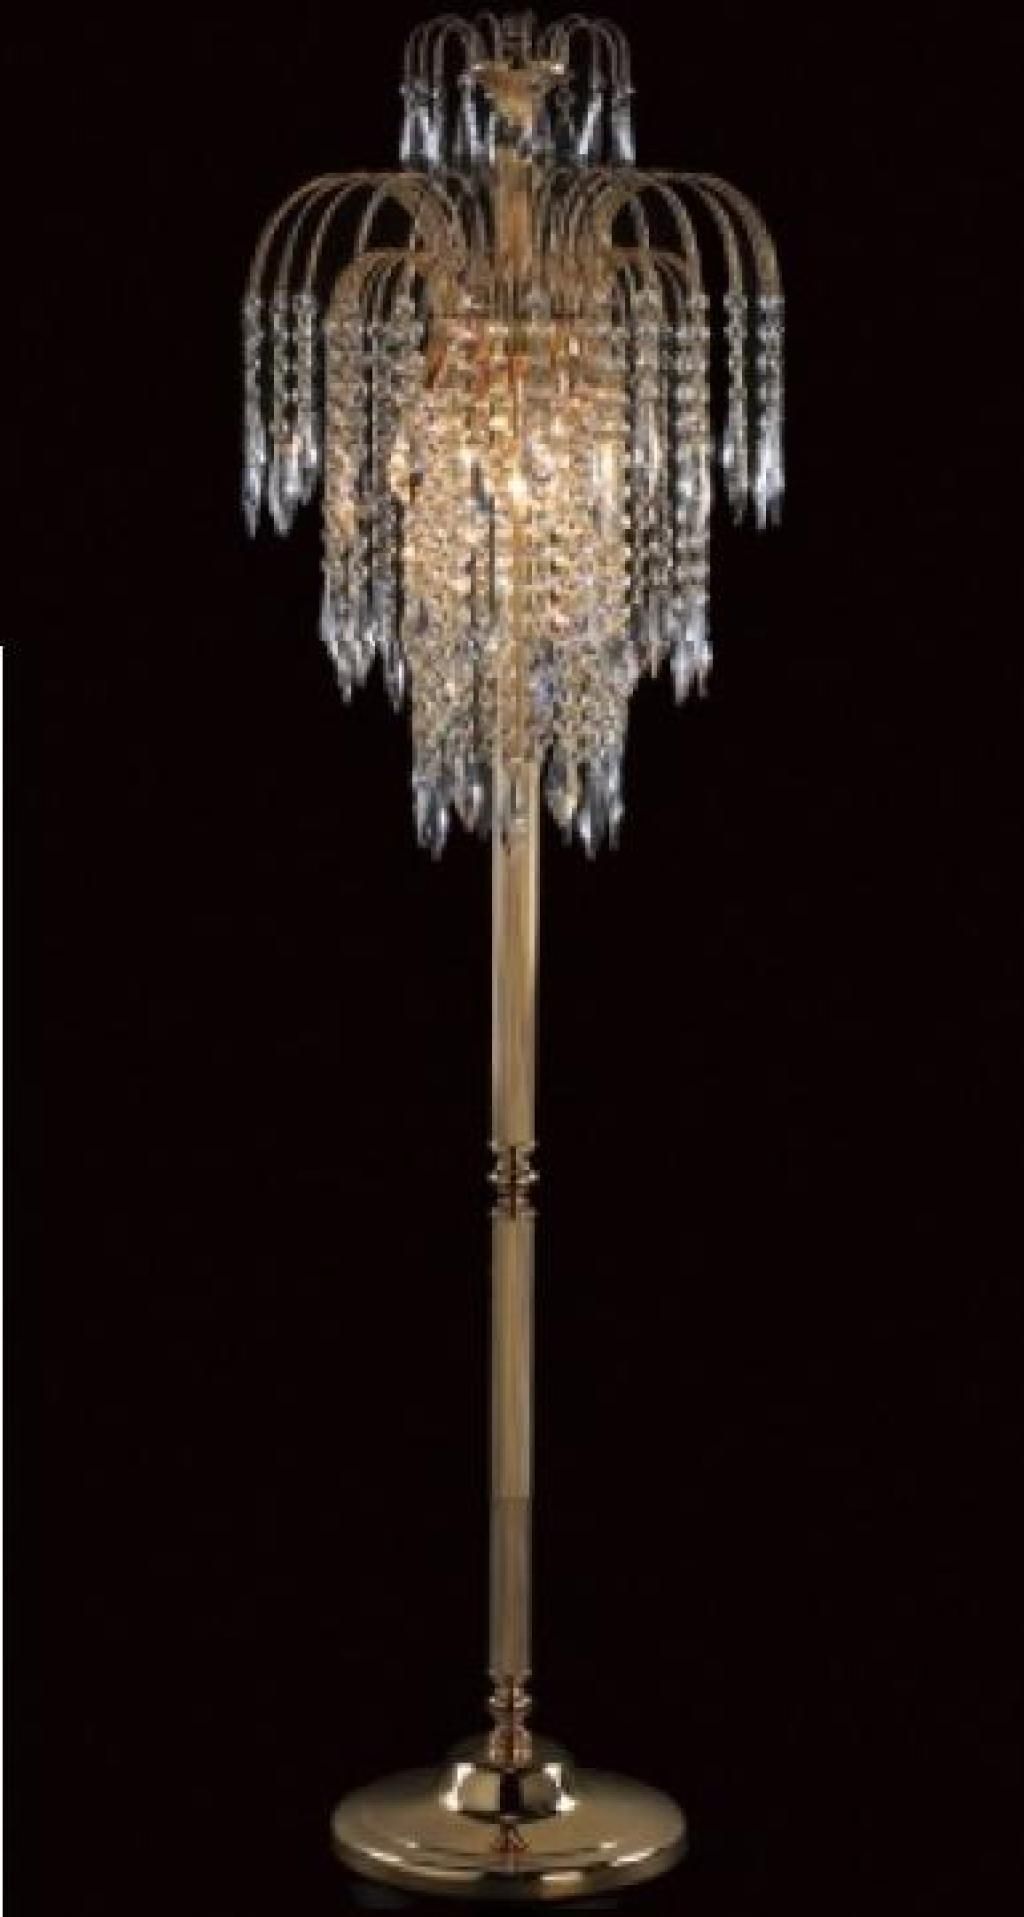 Chandelier Table Lamp Uk Xiedp Lights Decoration Inside Weird Chandeliers (View 10 of 15)